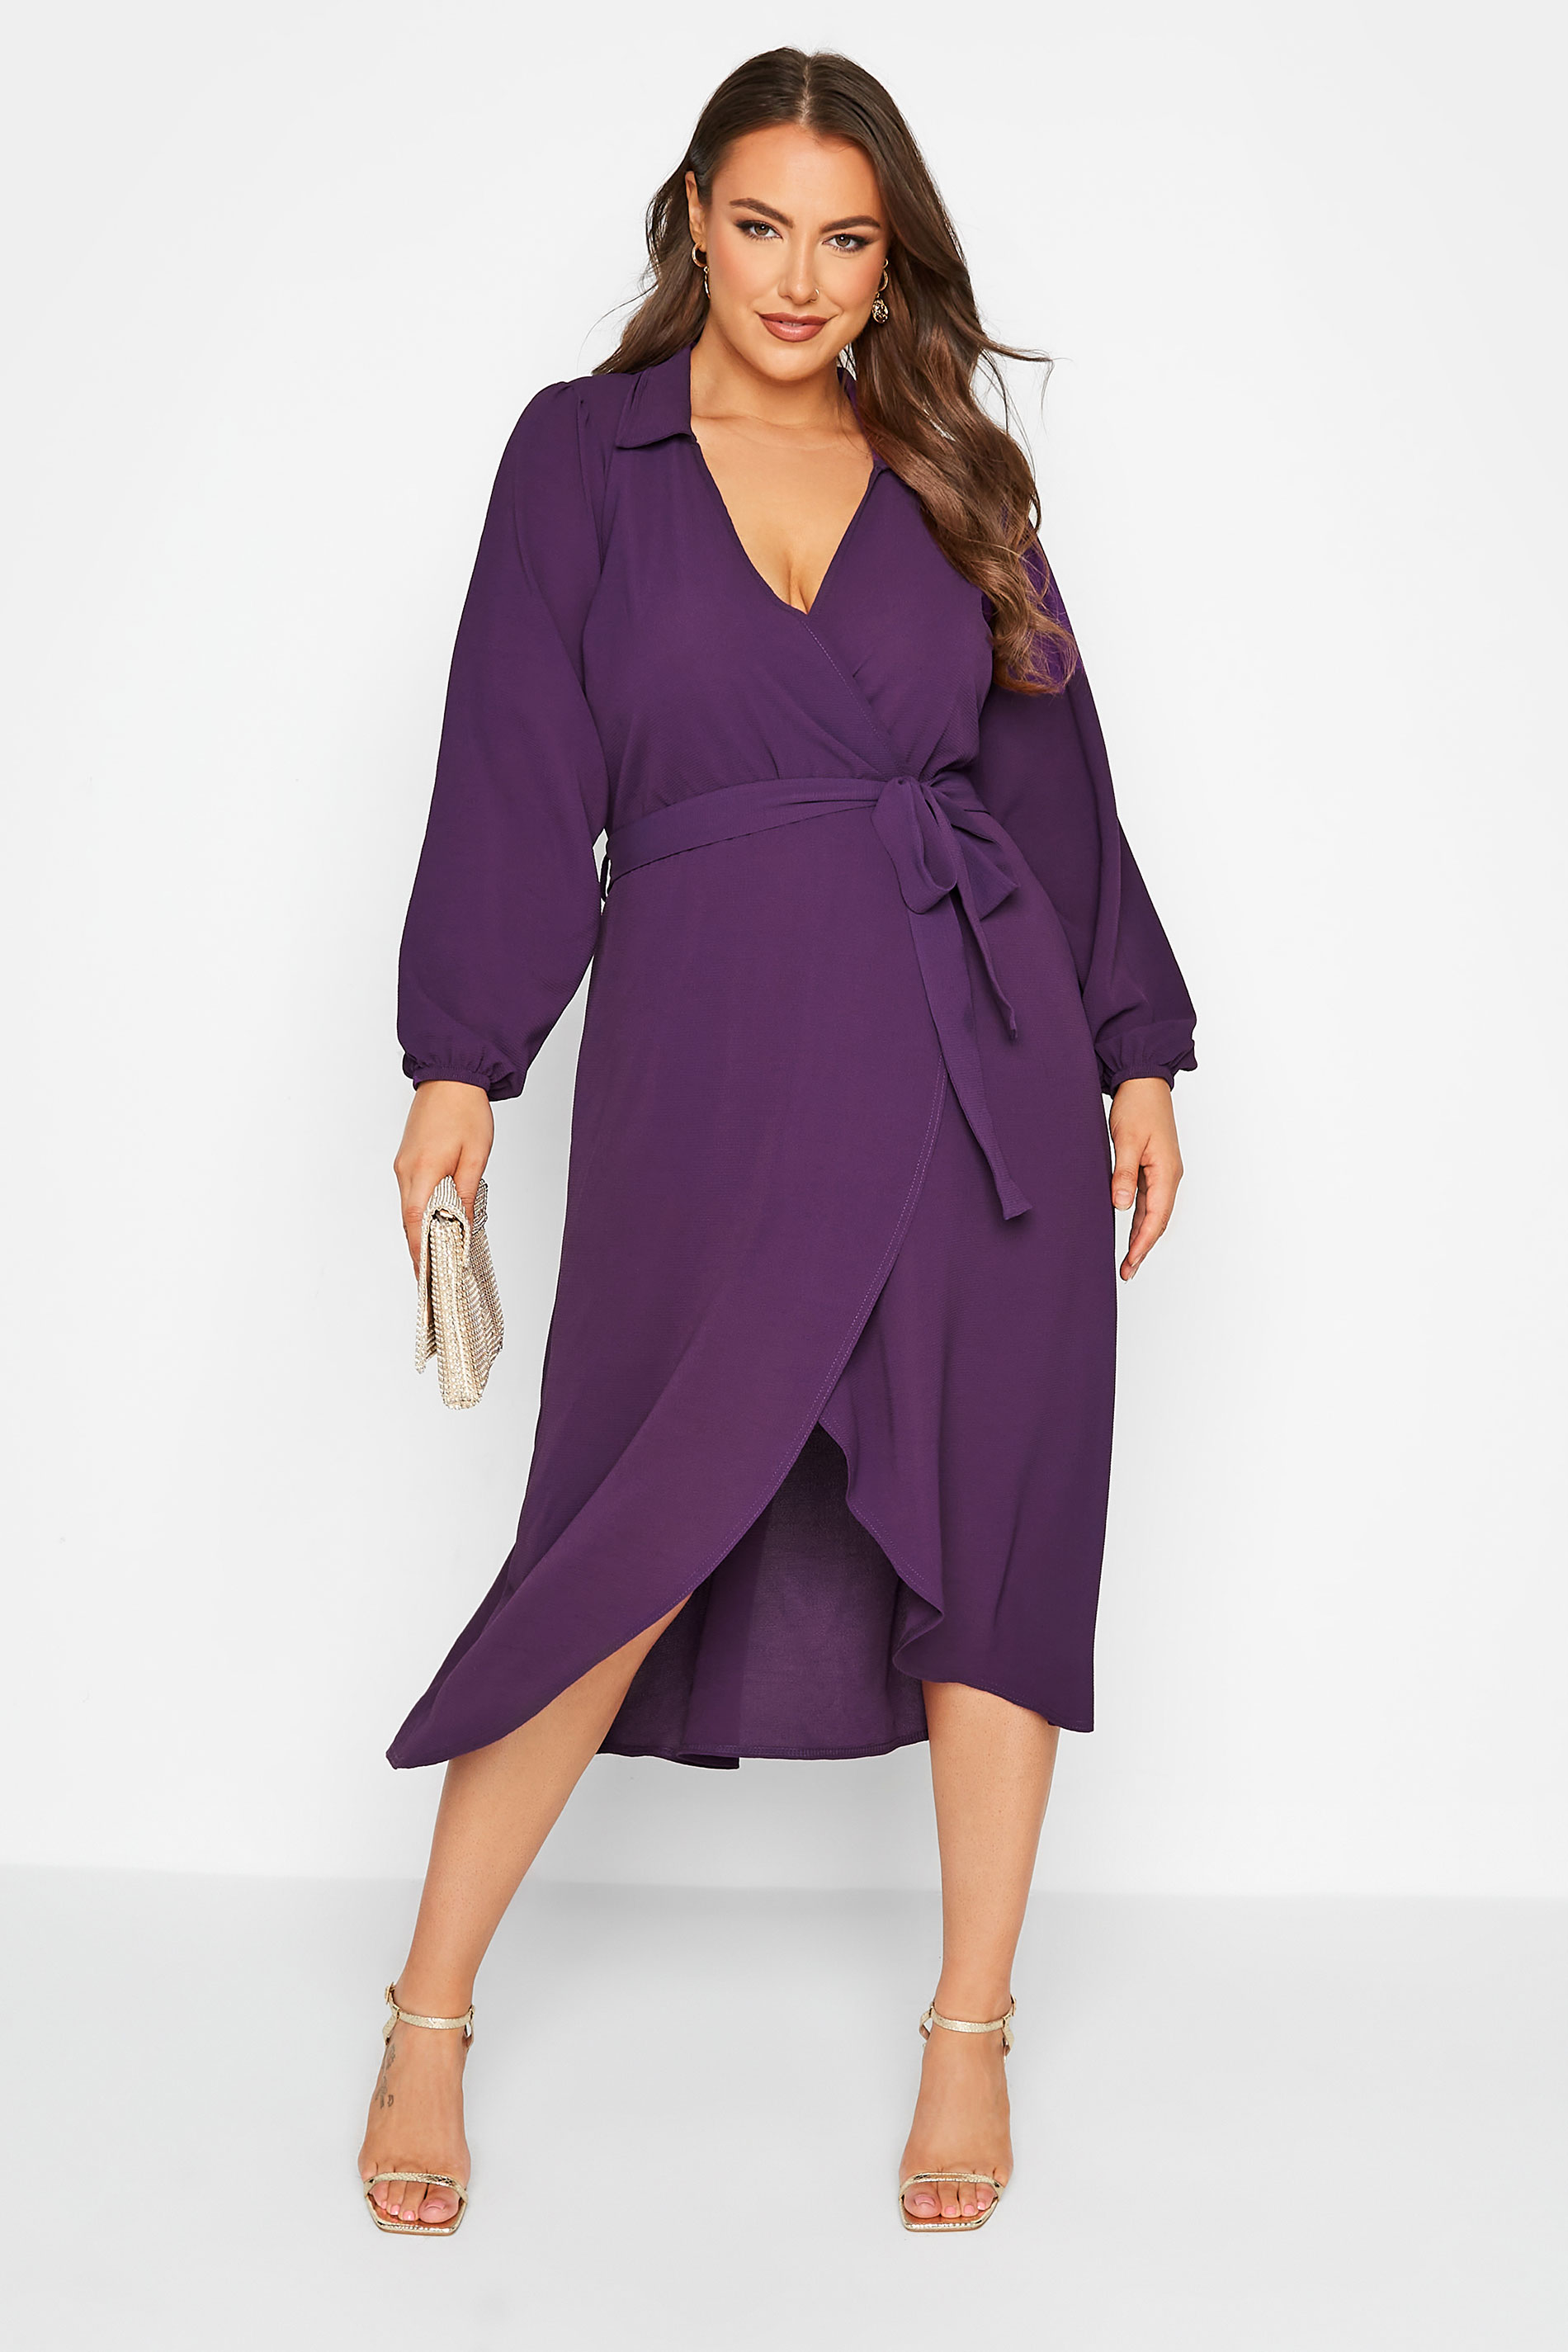 LIMITED COLLECTION Plus Size Purple Wrap Dress | Yours Clothing 1